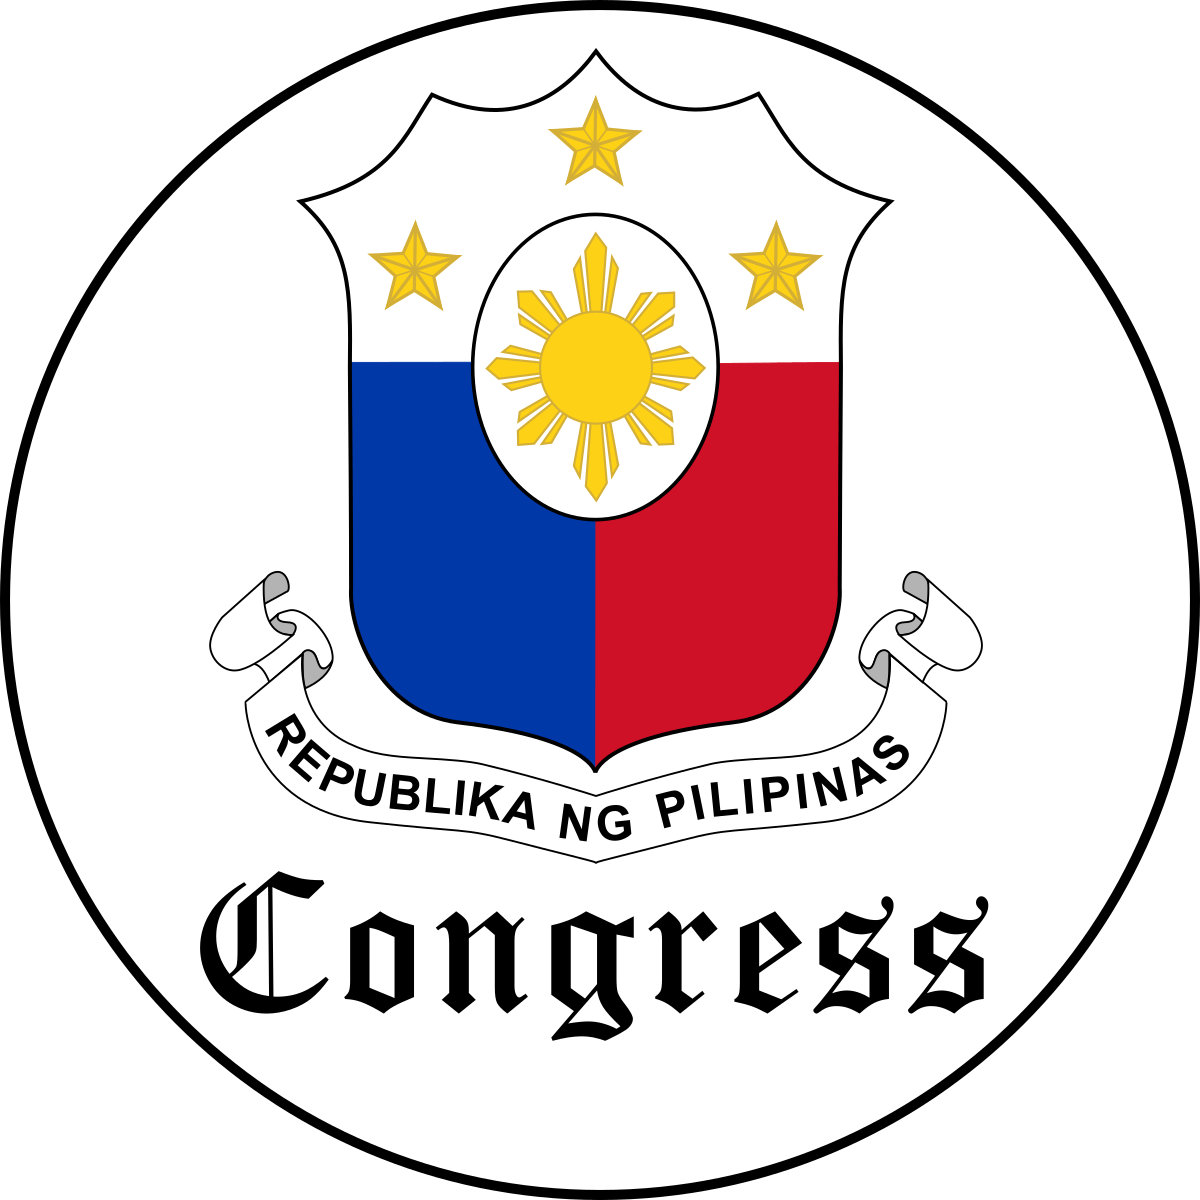 Phillippines Logo - Congress of the Philippines